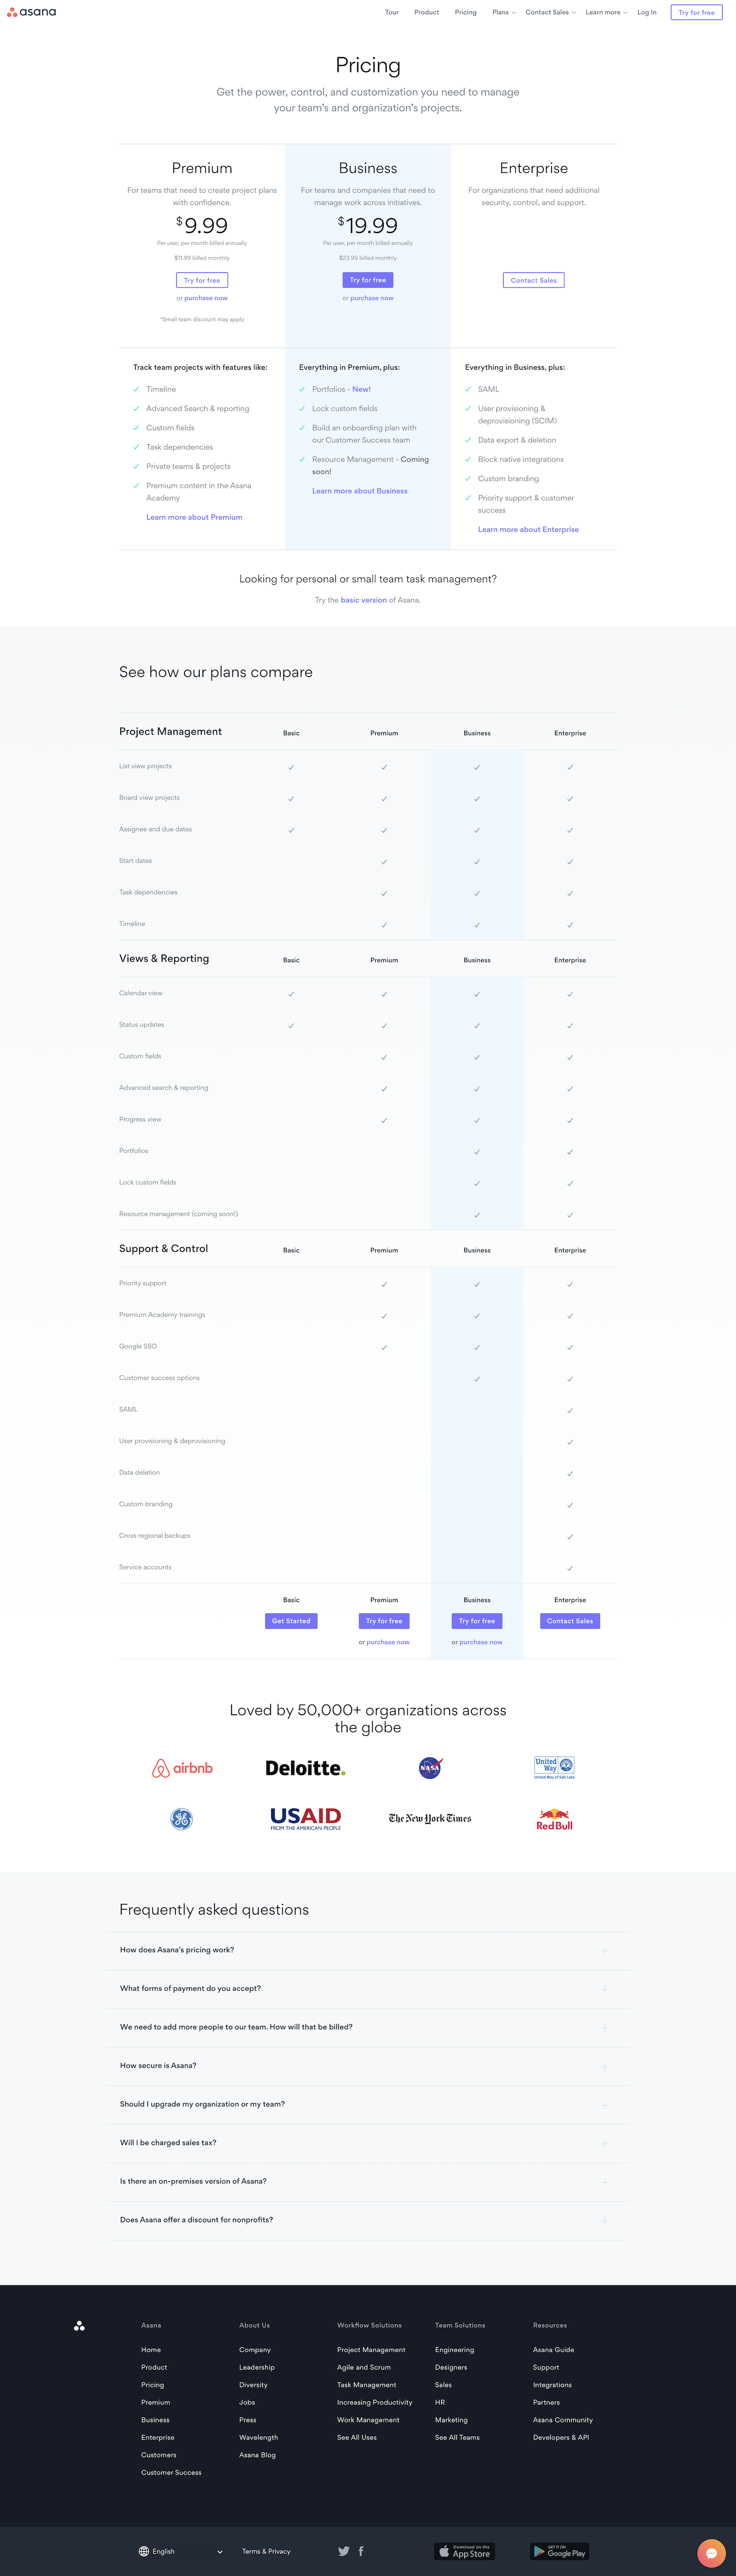 Screenshot of the Pricing page from the Asana website.